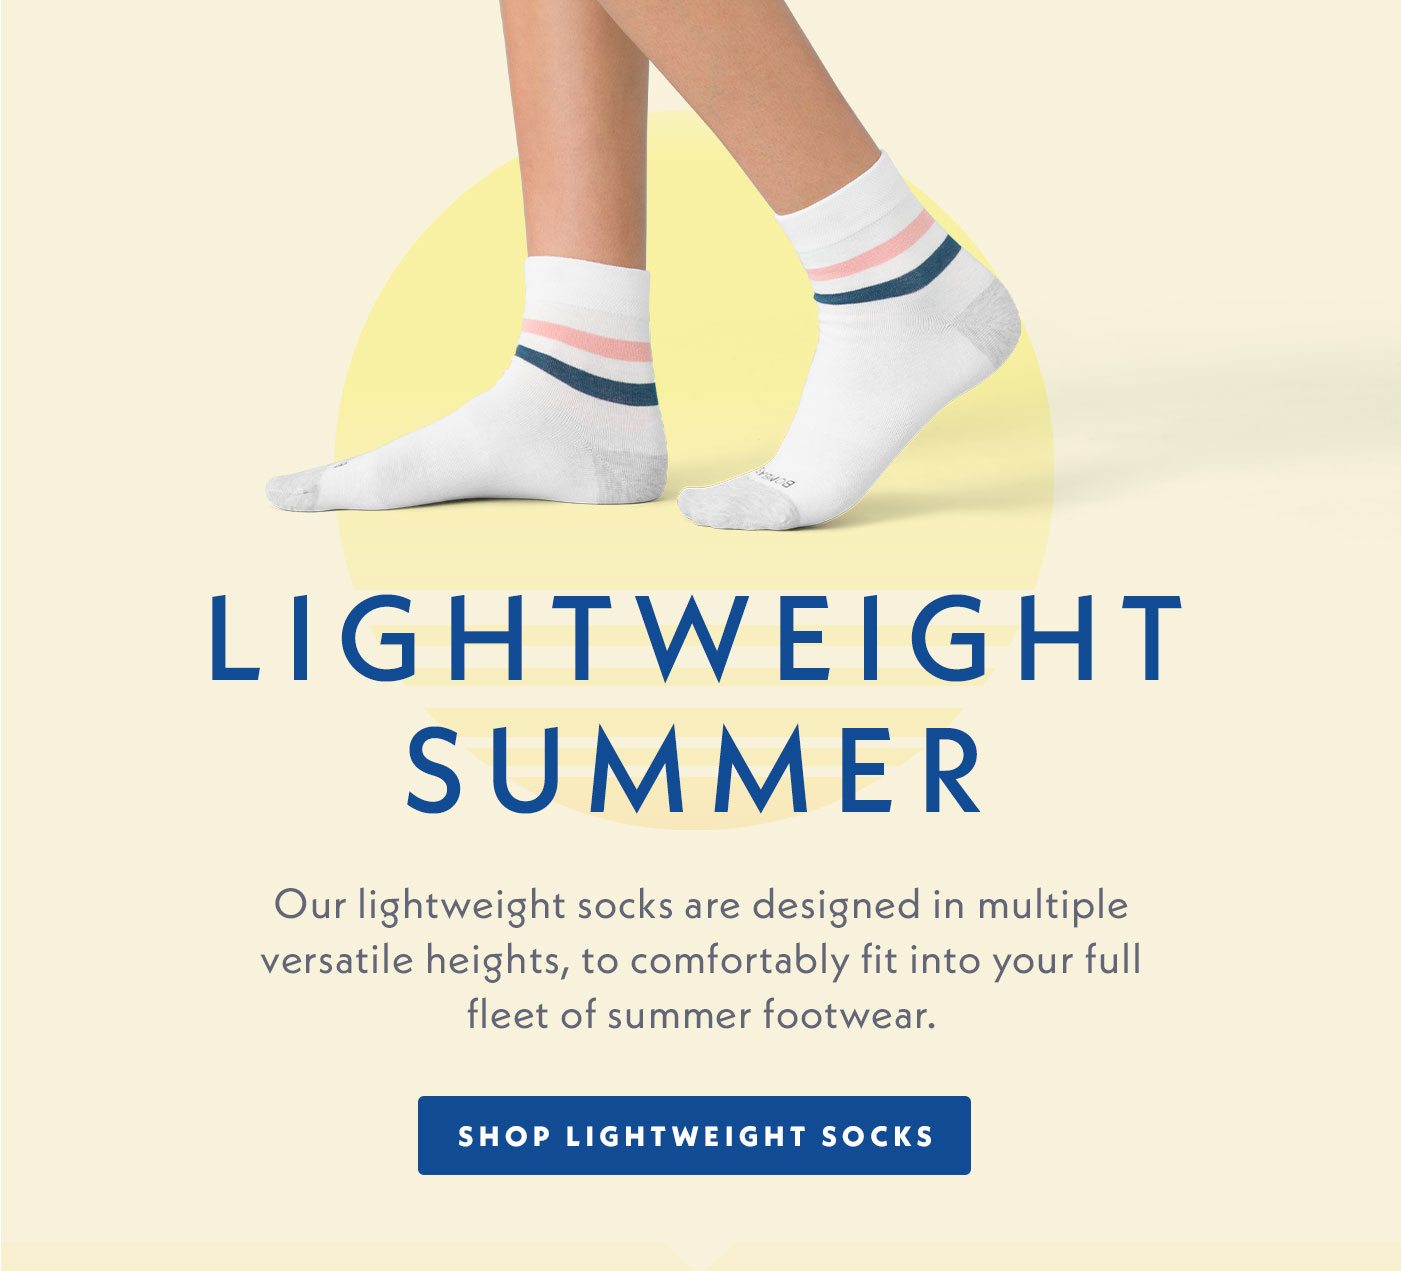 Lightweight Summer | Our lightweight socks are designed in multiple versatile heights, to comfortably fit into your full fleet of summer footwear. | Shop Lightweight socks